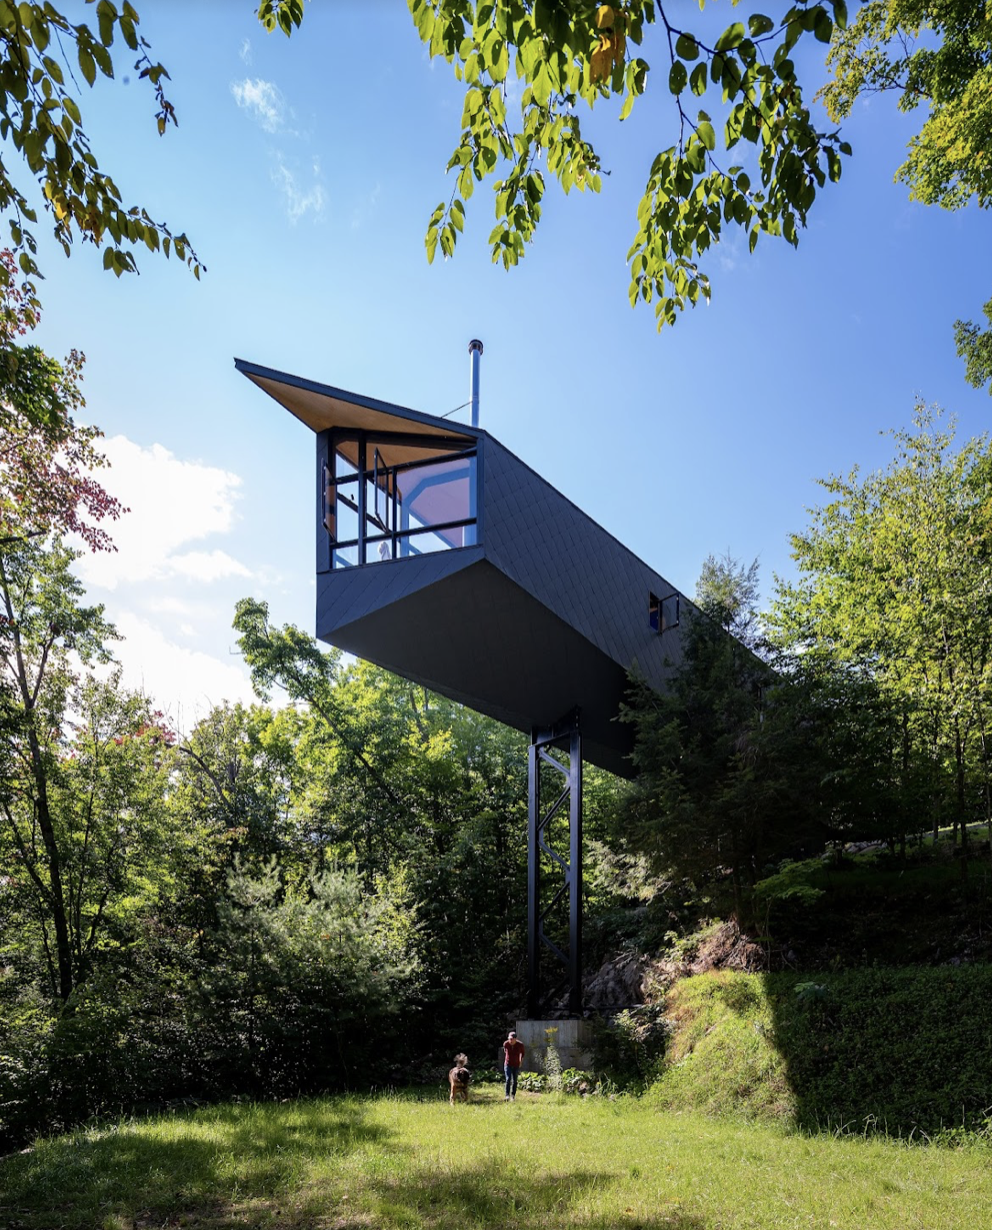  Prof. Paul Kariouk’s m.o.r.e cabin wins award from AIA New York